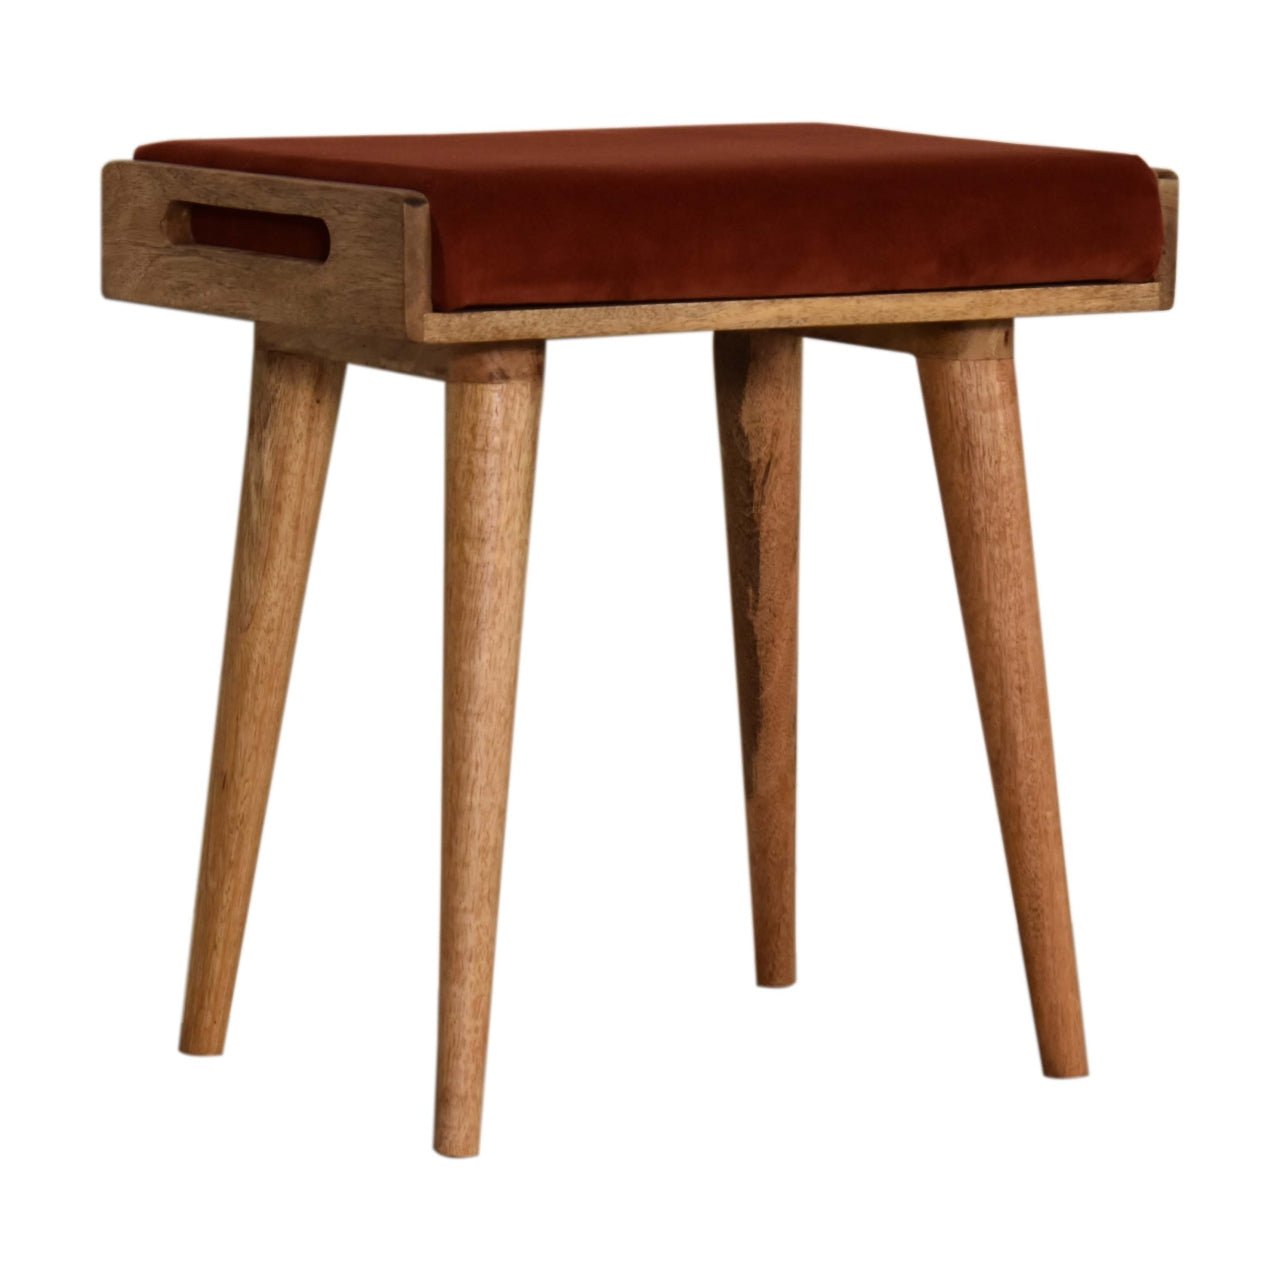 View Brick Red Velvet Tray Footstool information